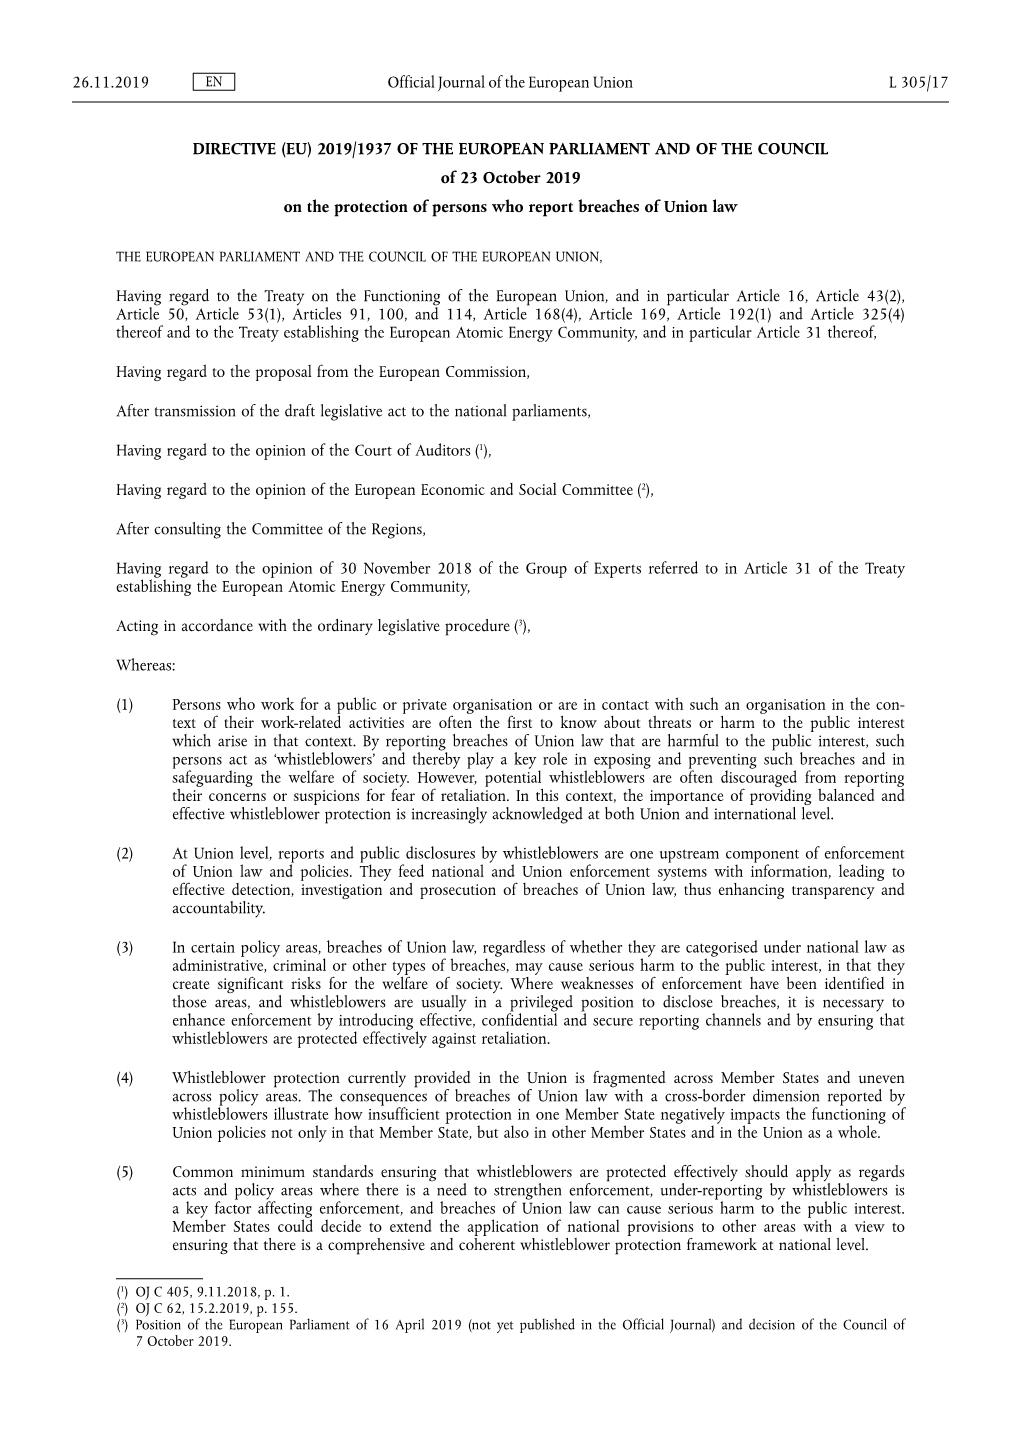 DIRECTIVE (EU) 2019/1937 of the EUROPEAN PARLIAMENT and of the COUNCIL of 23 October 2019 on the Protection of Persons Who Report Breaches of Union Law